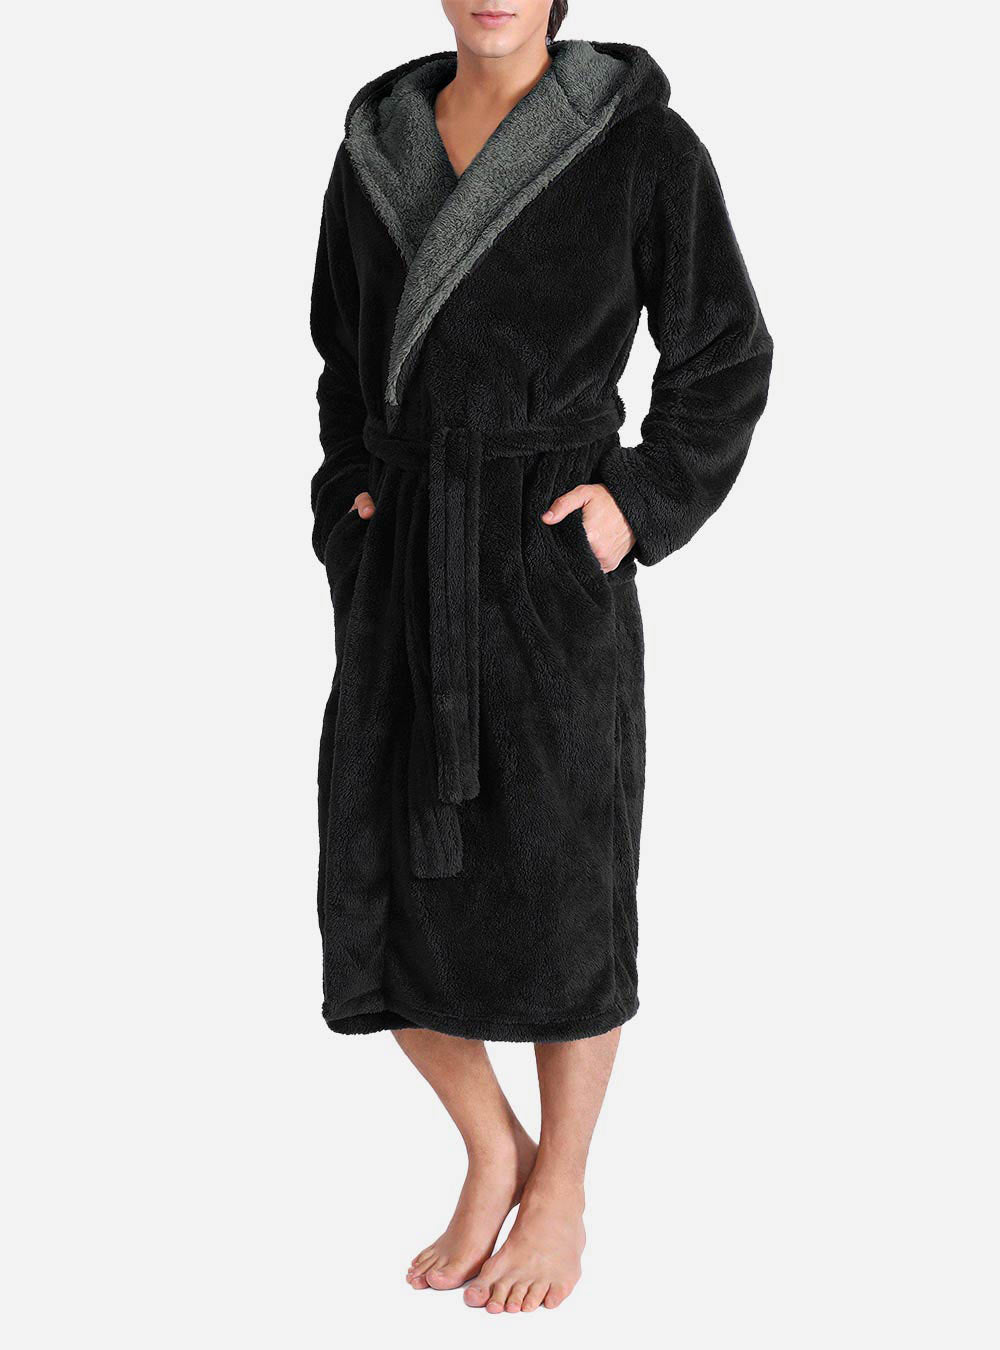 David Archy Flannel Robe With Hooded Premium Micro Fleece Full Length Warm  Plush Coral Comfy Premium